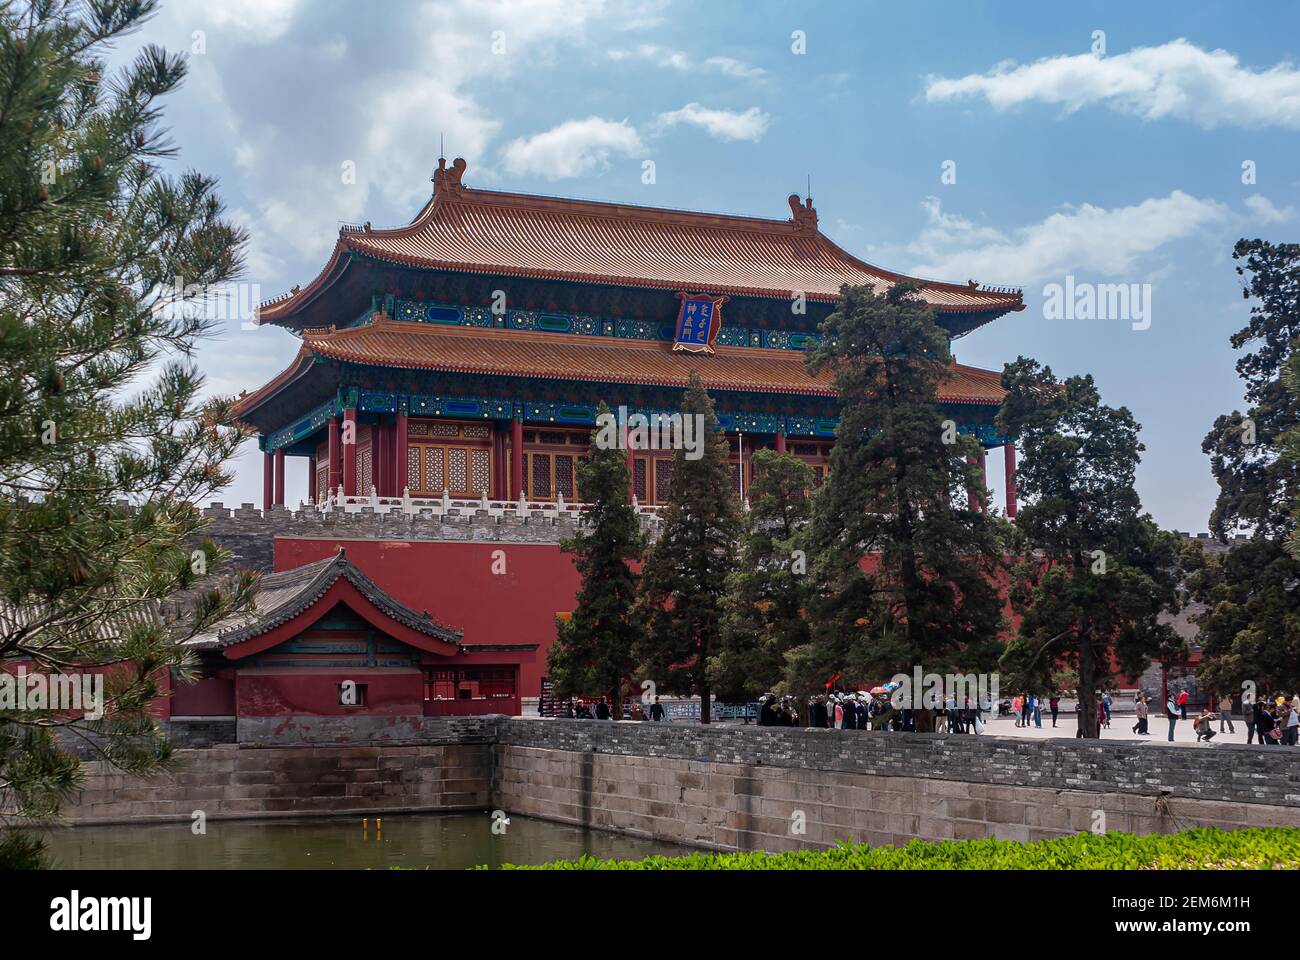 Beijing, China - April 27, 2010: Red Gate of divine Prowess building as exit of Forbidden City North side under blue cloudscape. Moat and green trees. Stock Photo